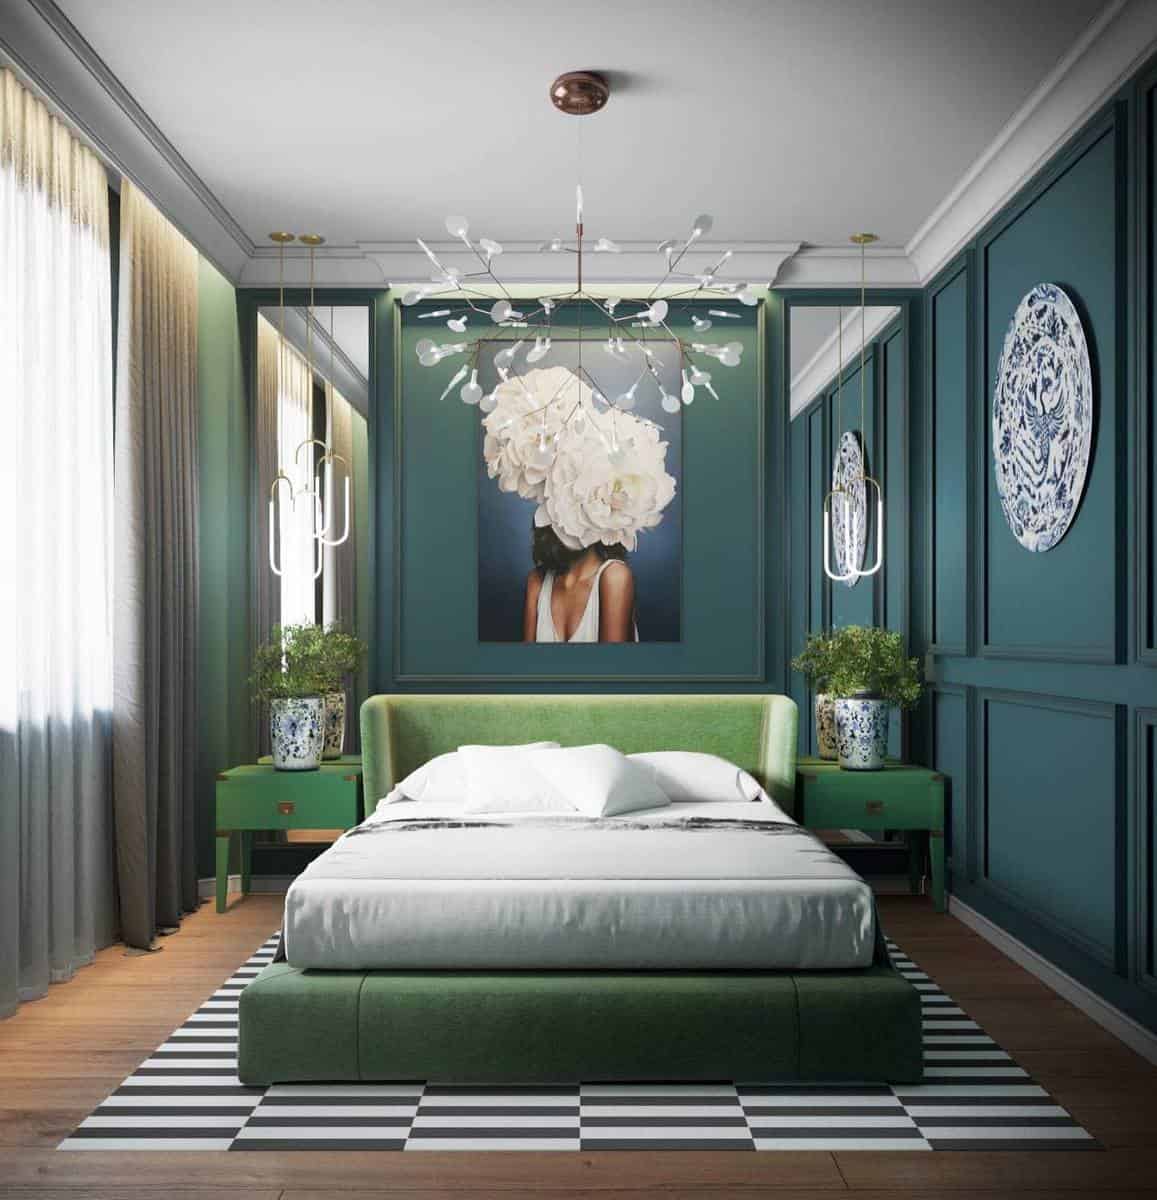 textured green wall platform bed china vases luxury 